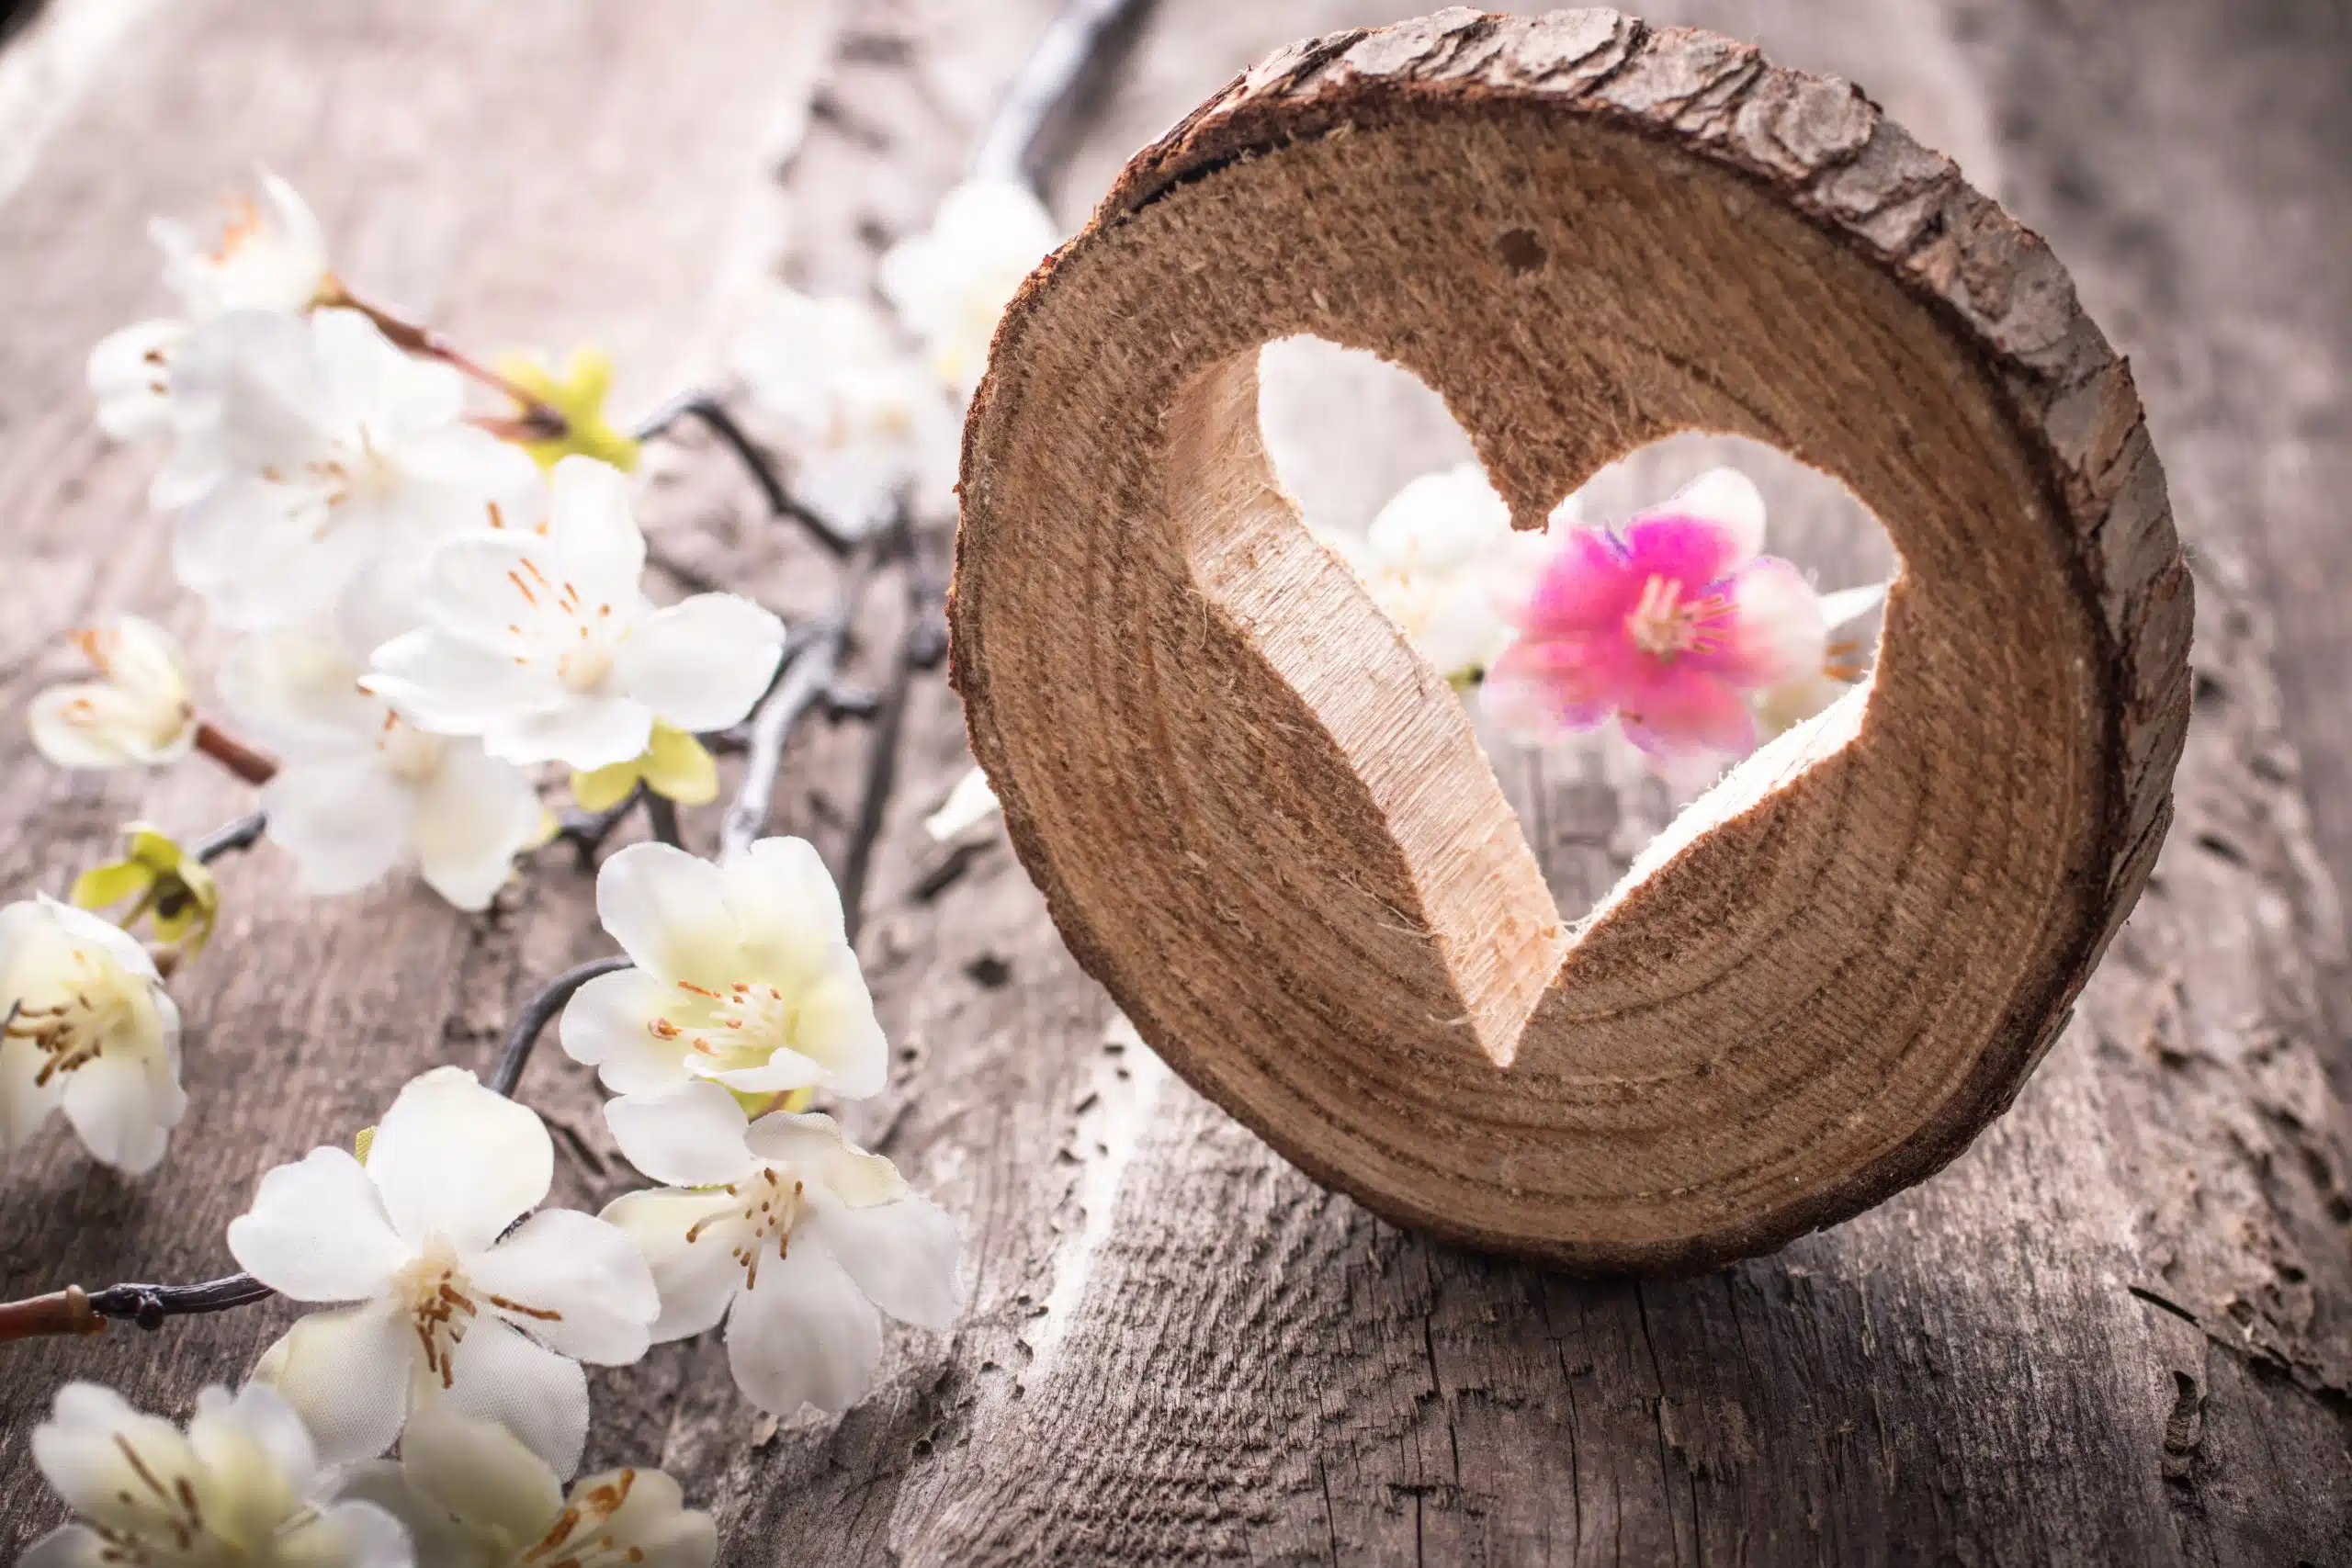 Heart carved out from round wood on rustic wooden platform, with white orchids beside it.